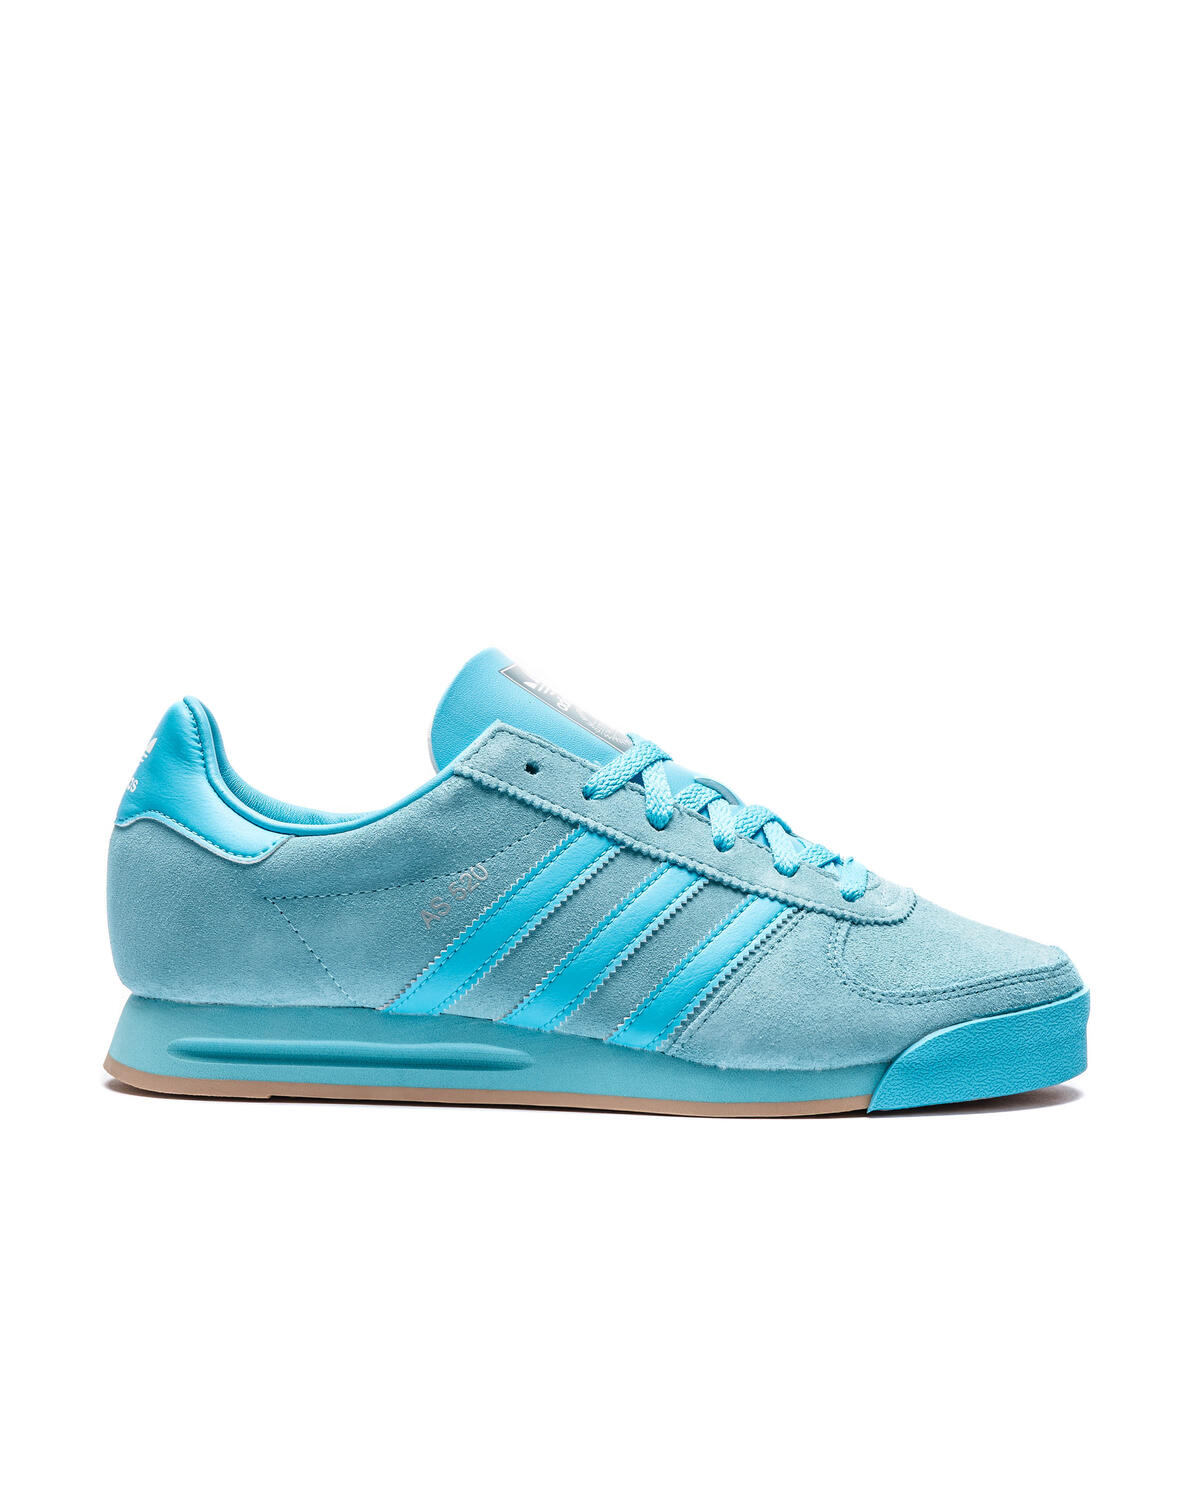 hamburger høg Sidst adidas Originals AS 520 | adidas wide 2g08 shoe for women sale in texas |  HotelomegaShops STORE | GW9644